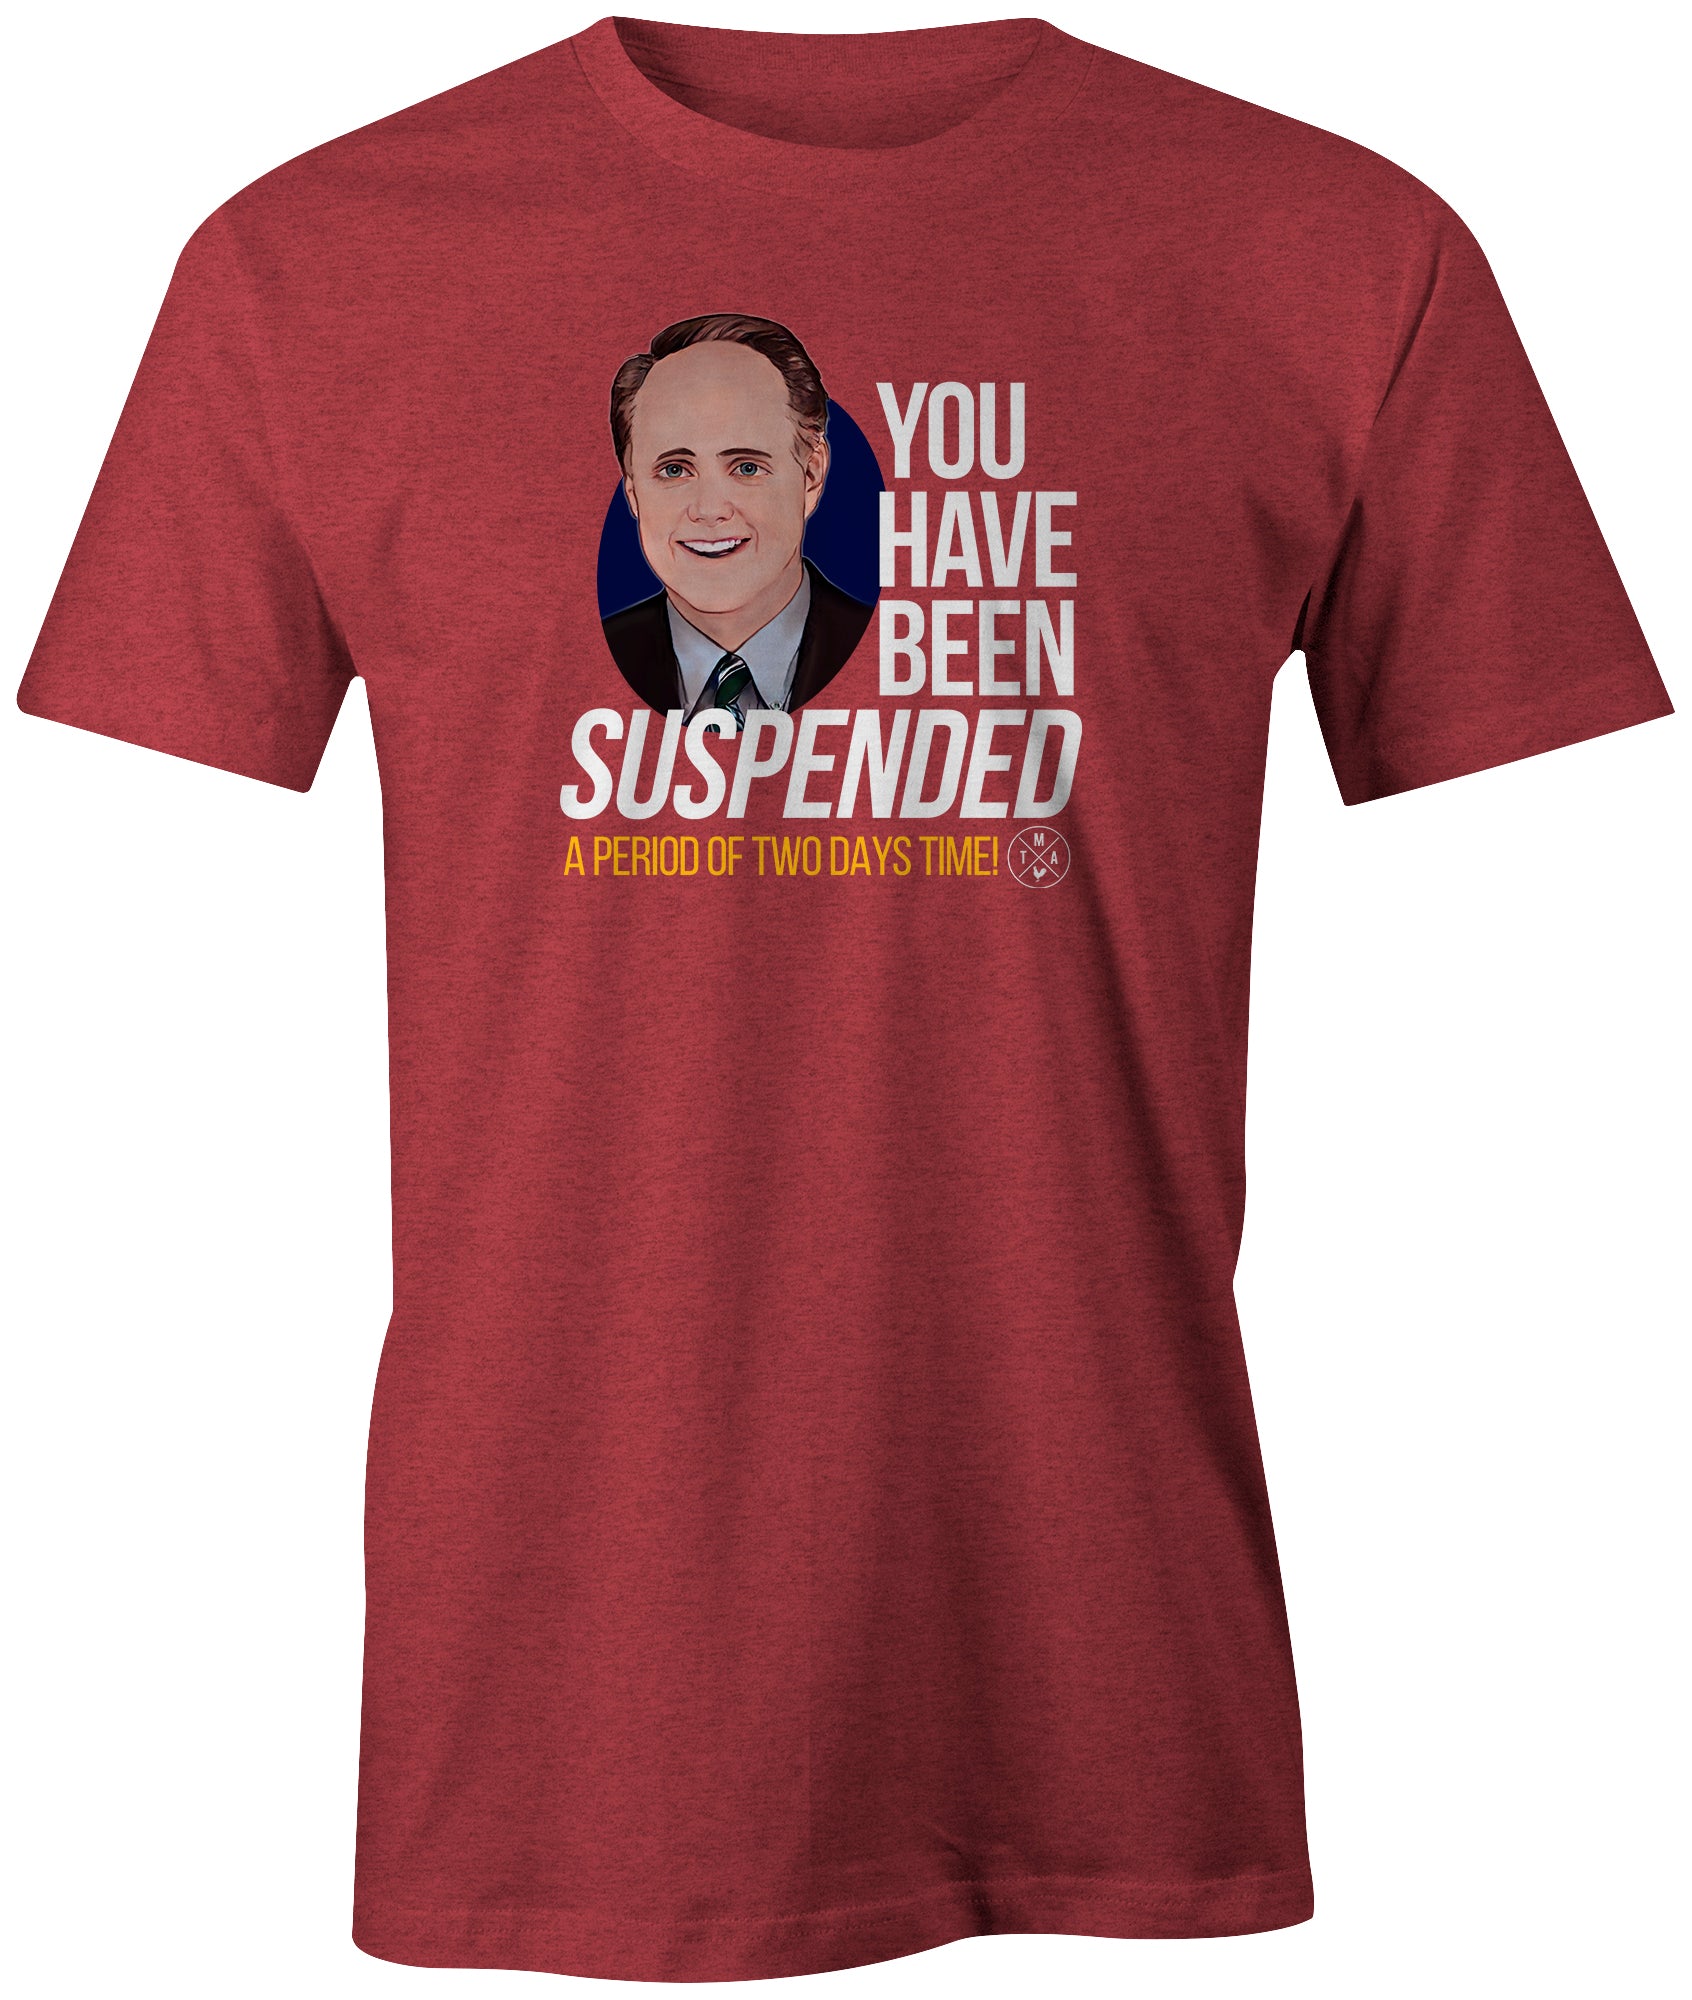 doug vaughn kmov 4 news sports st louis shirt apparel suspended 2 days time logyule tma the morning after cloting appareal arch